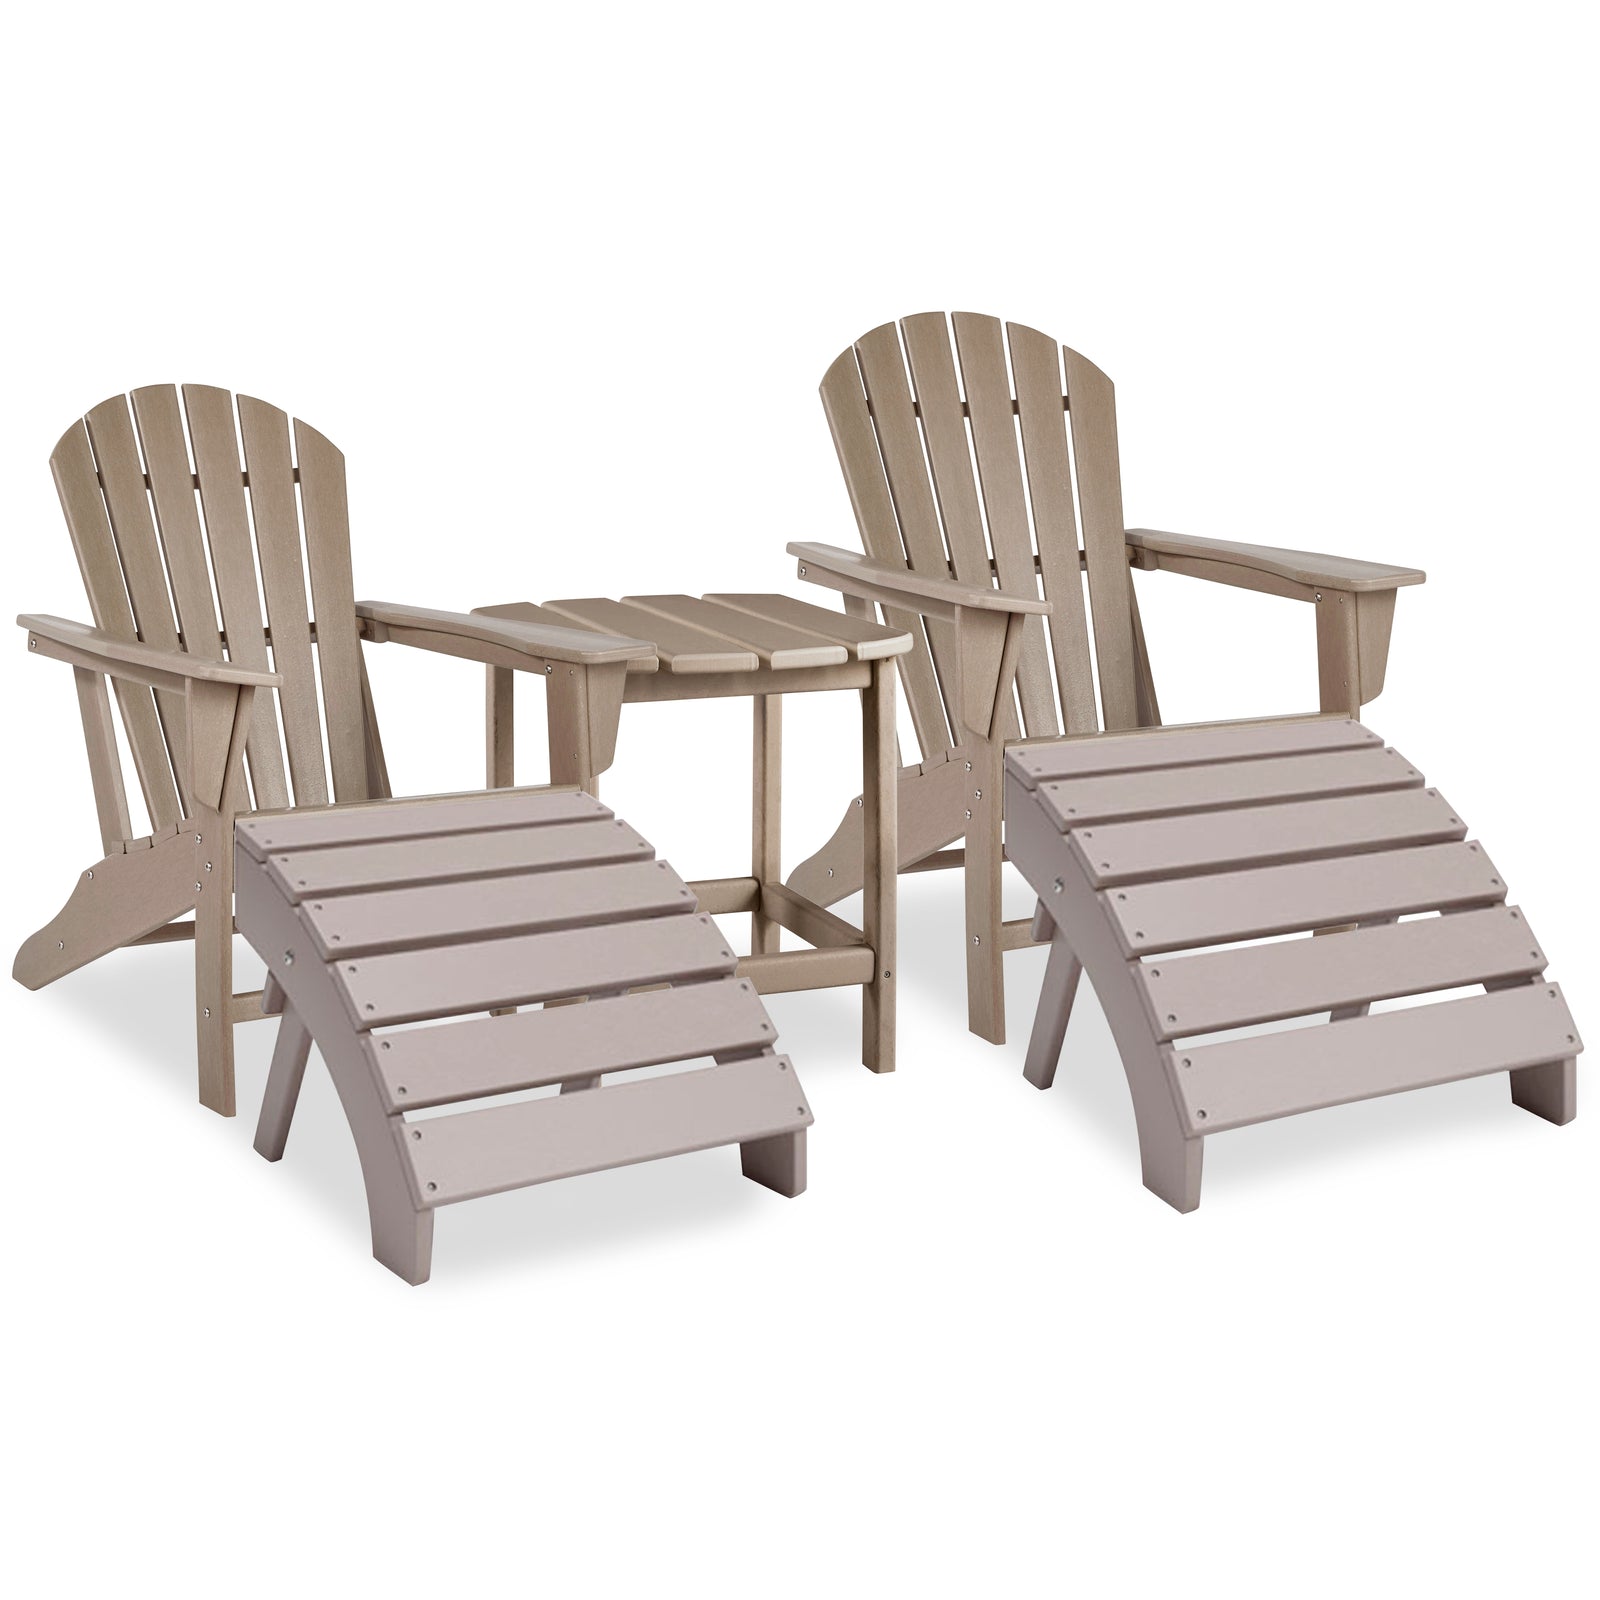 Sundown Driftwood Treasure 2 Outdoor Adirondack Chairs And Ottomans With Side Table